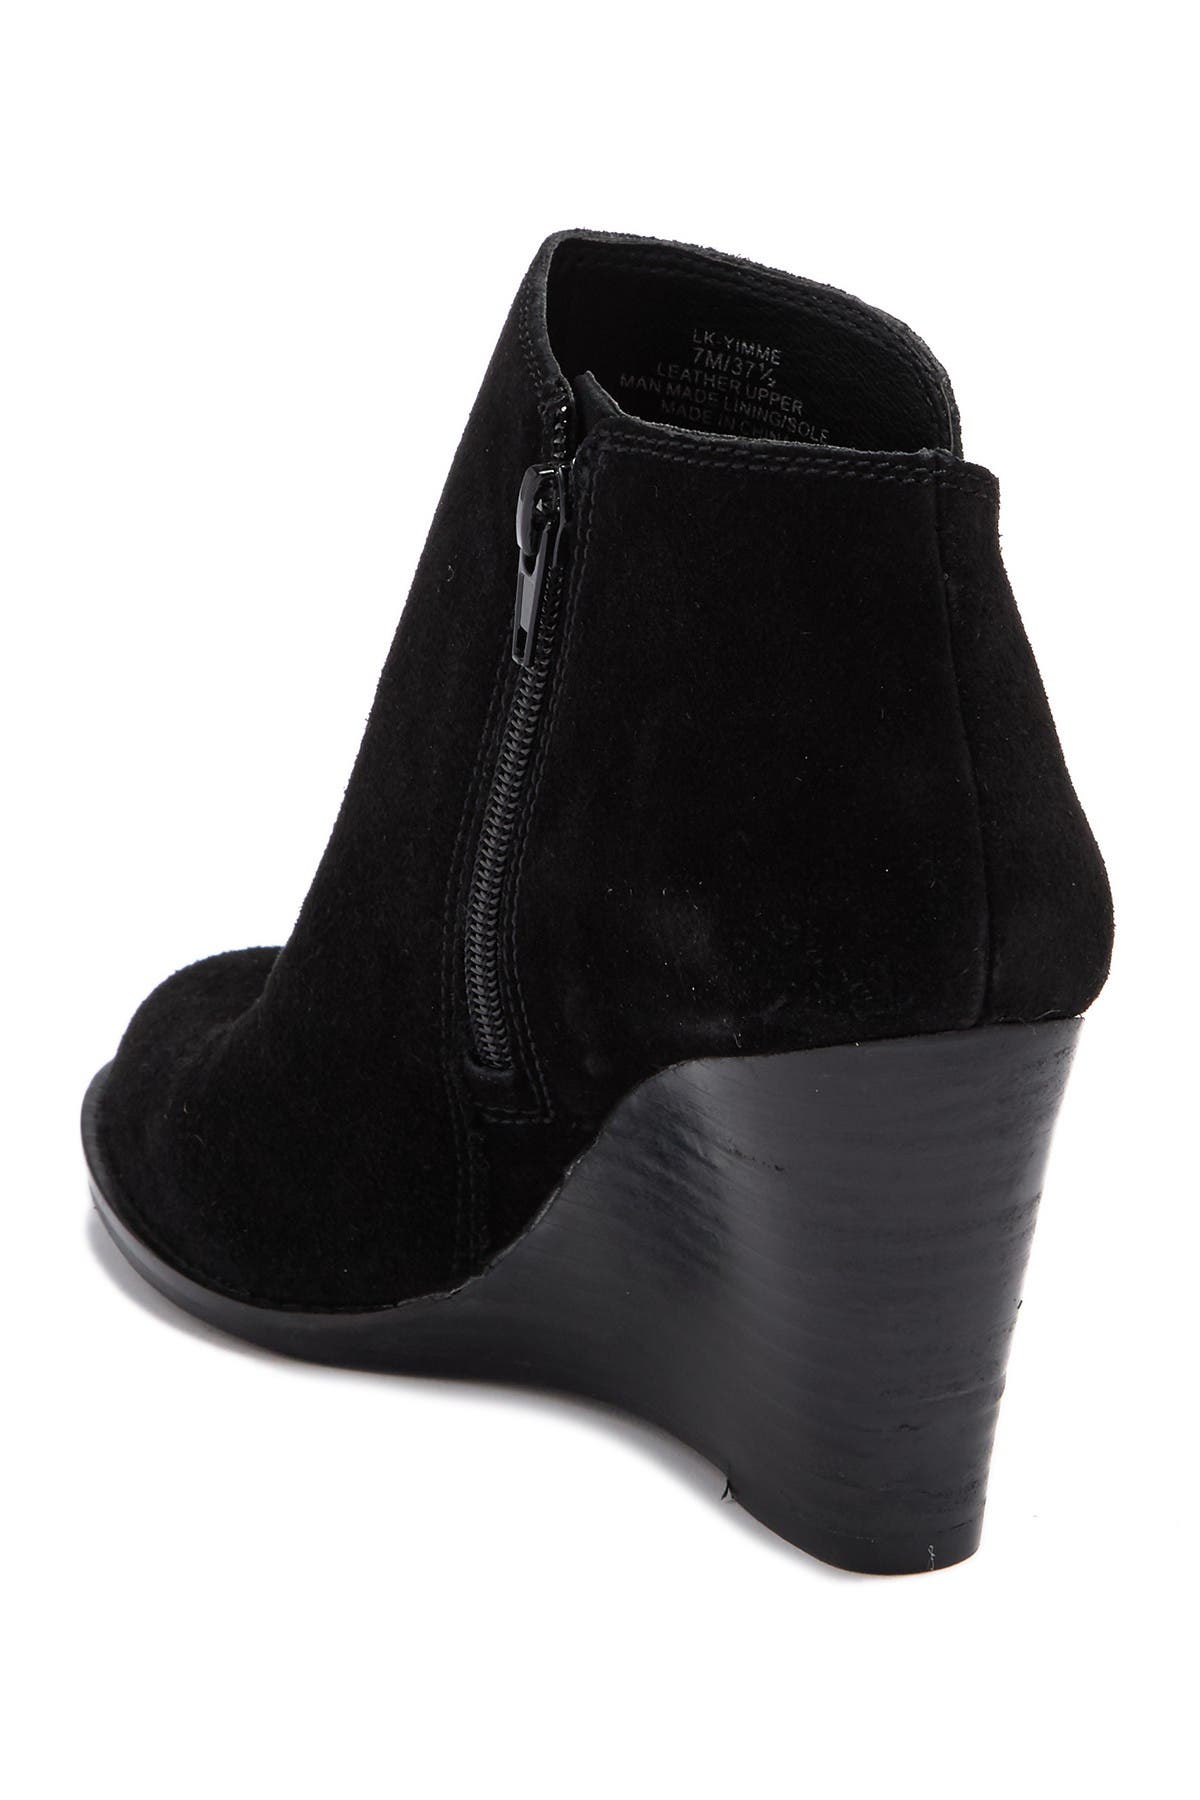 lucky brand yimme wedge bootie